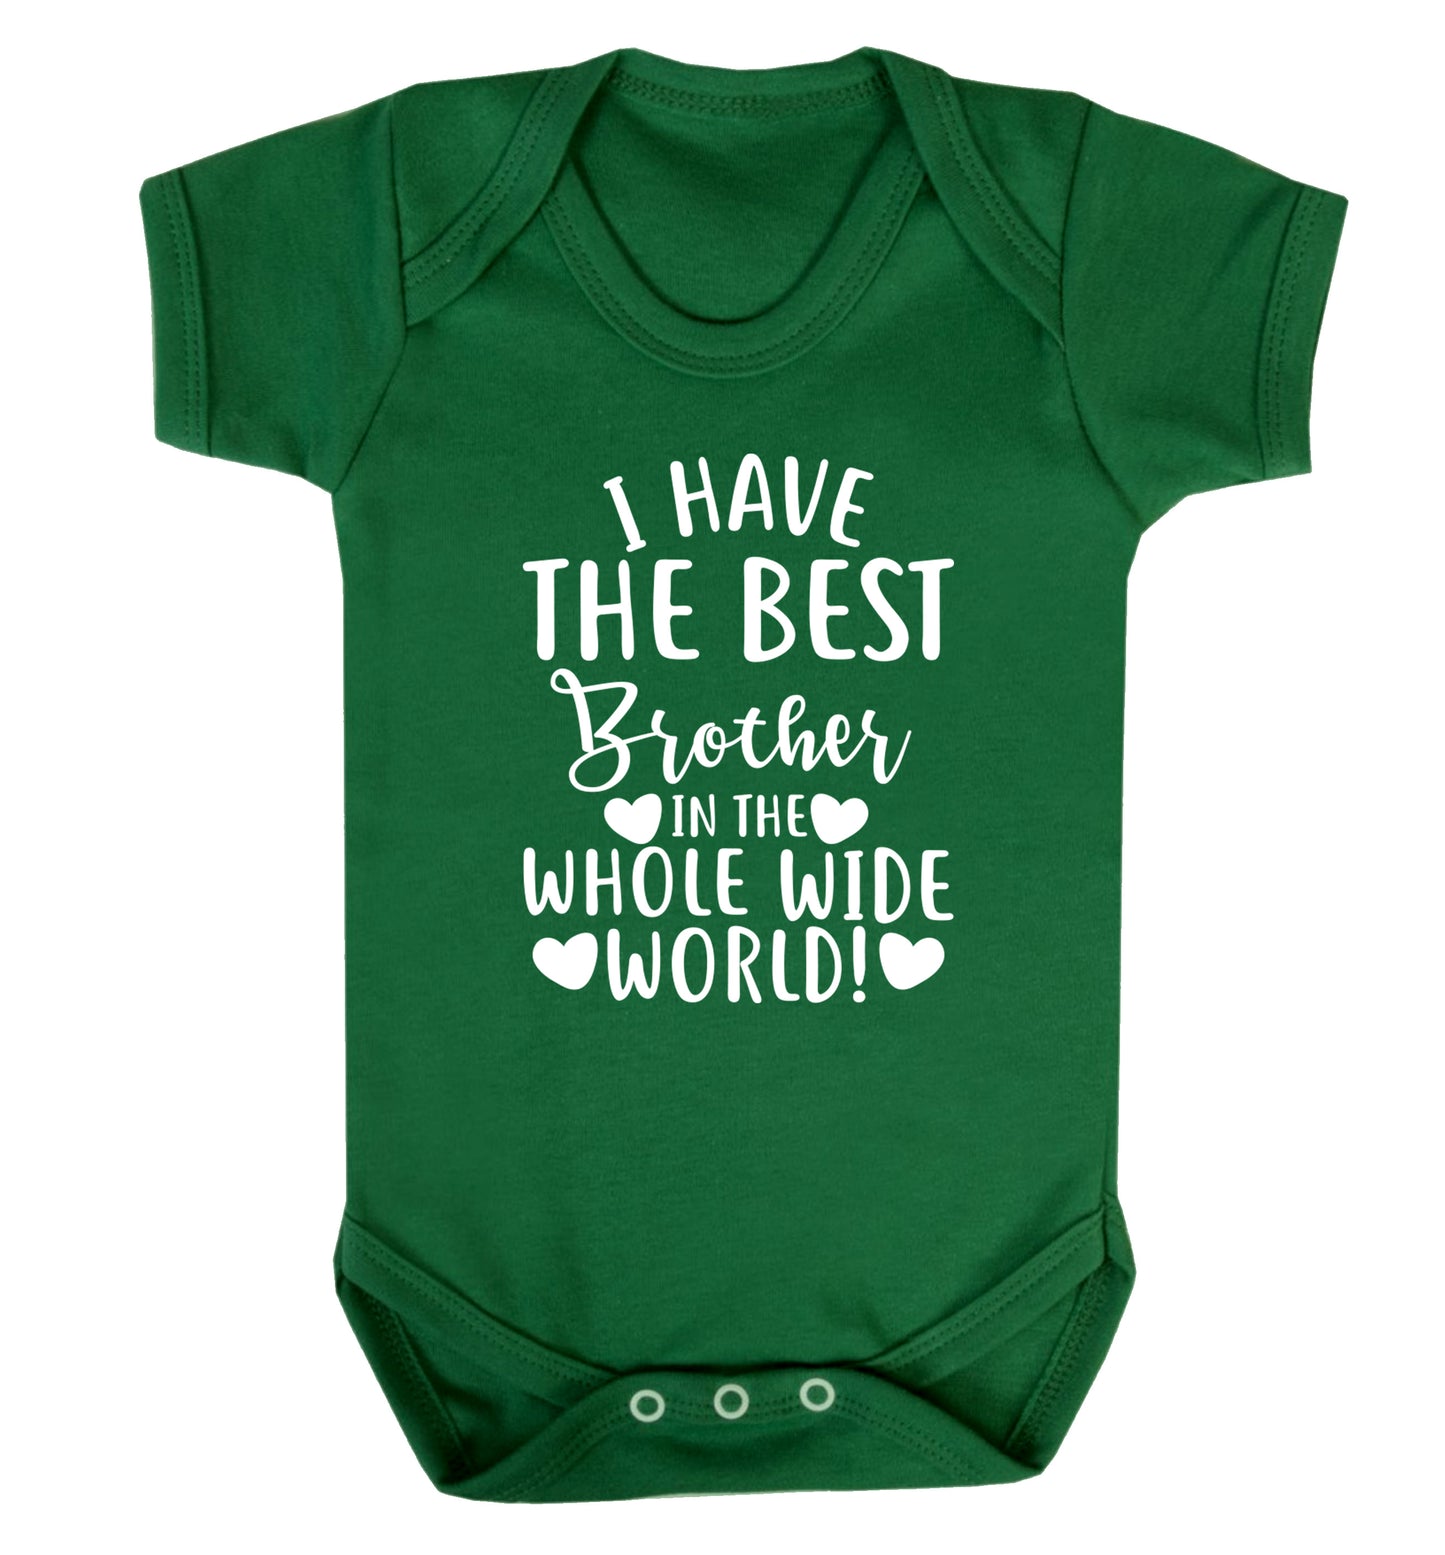 I have the best brother in the whole wide world! Baby Vest green 18-24 months